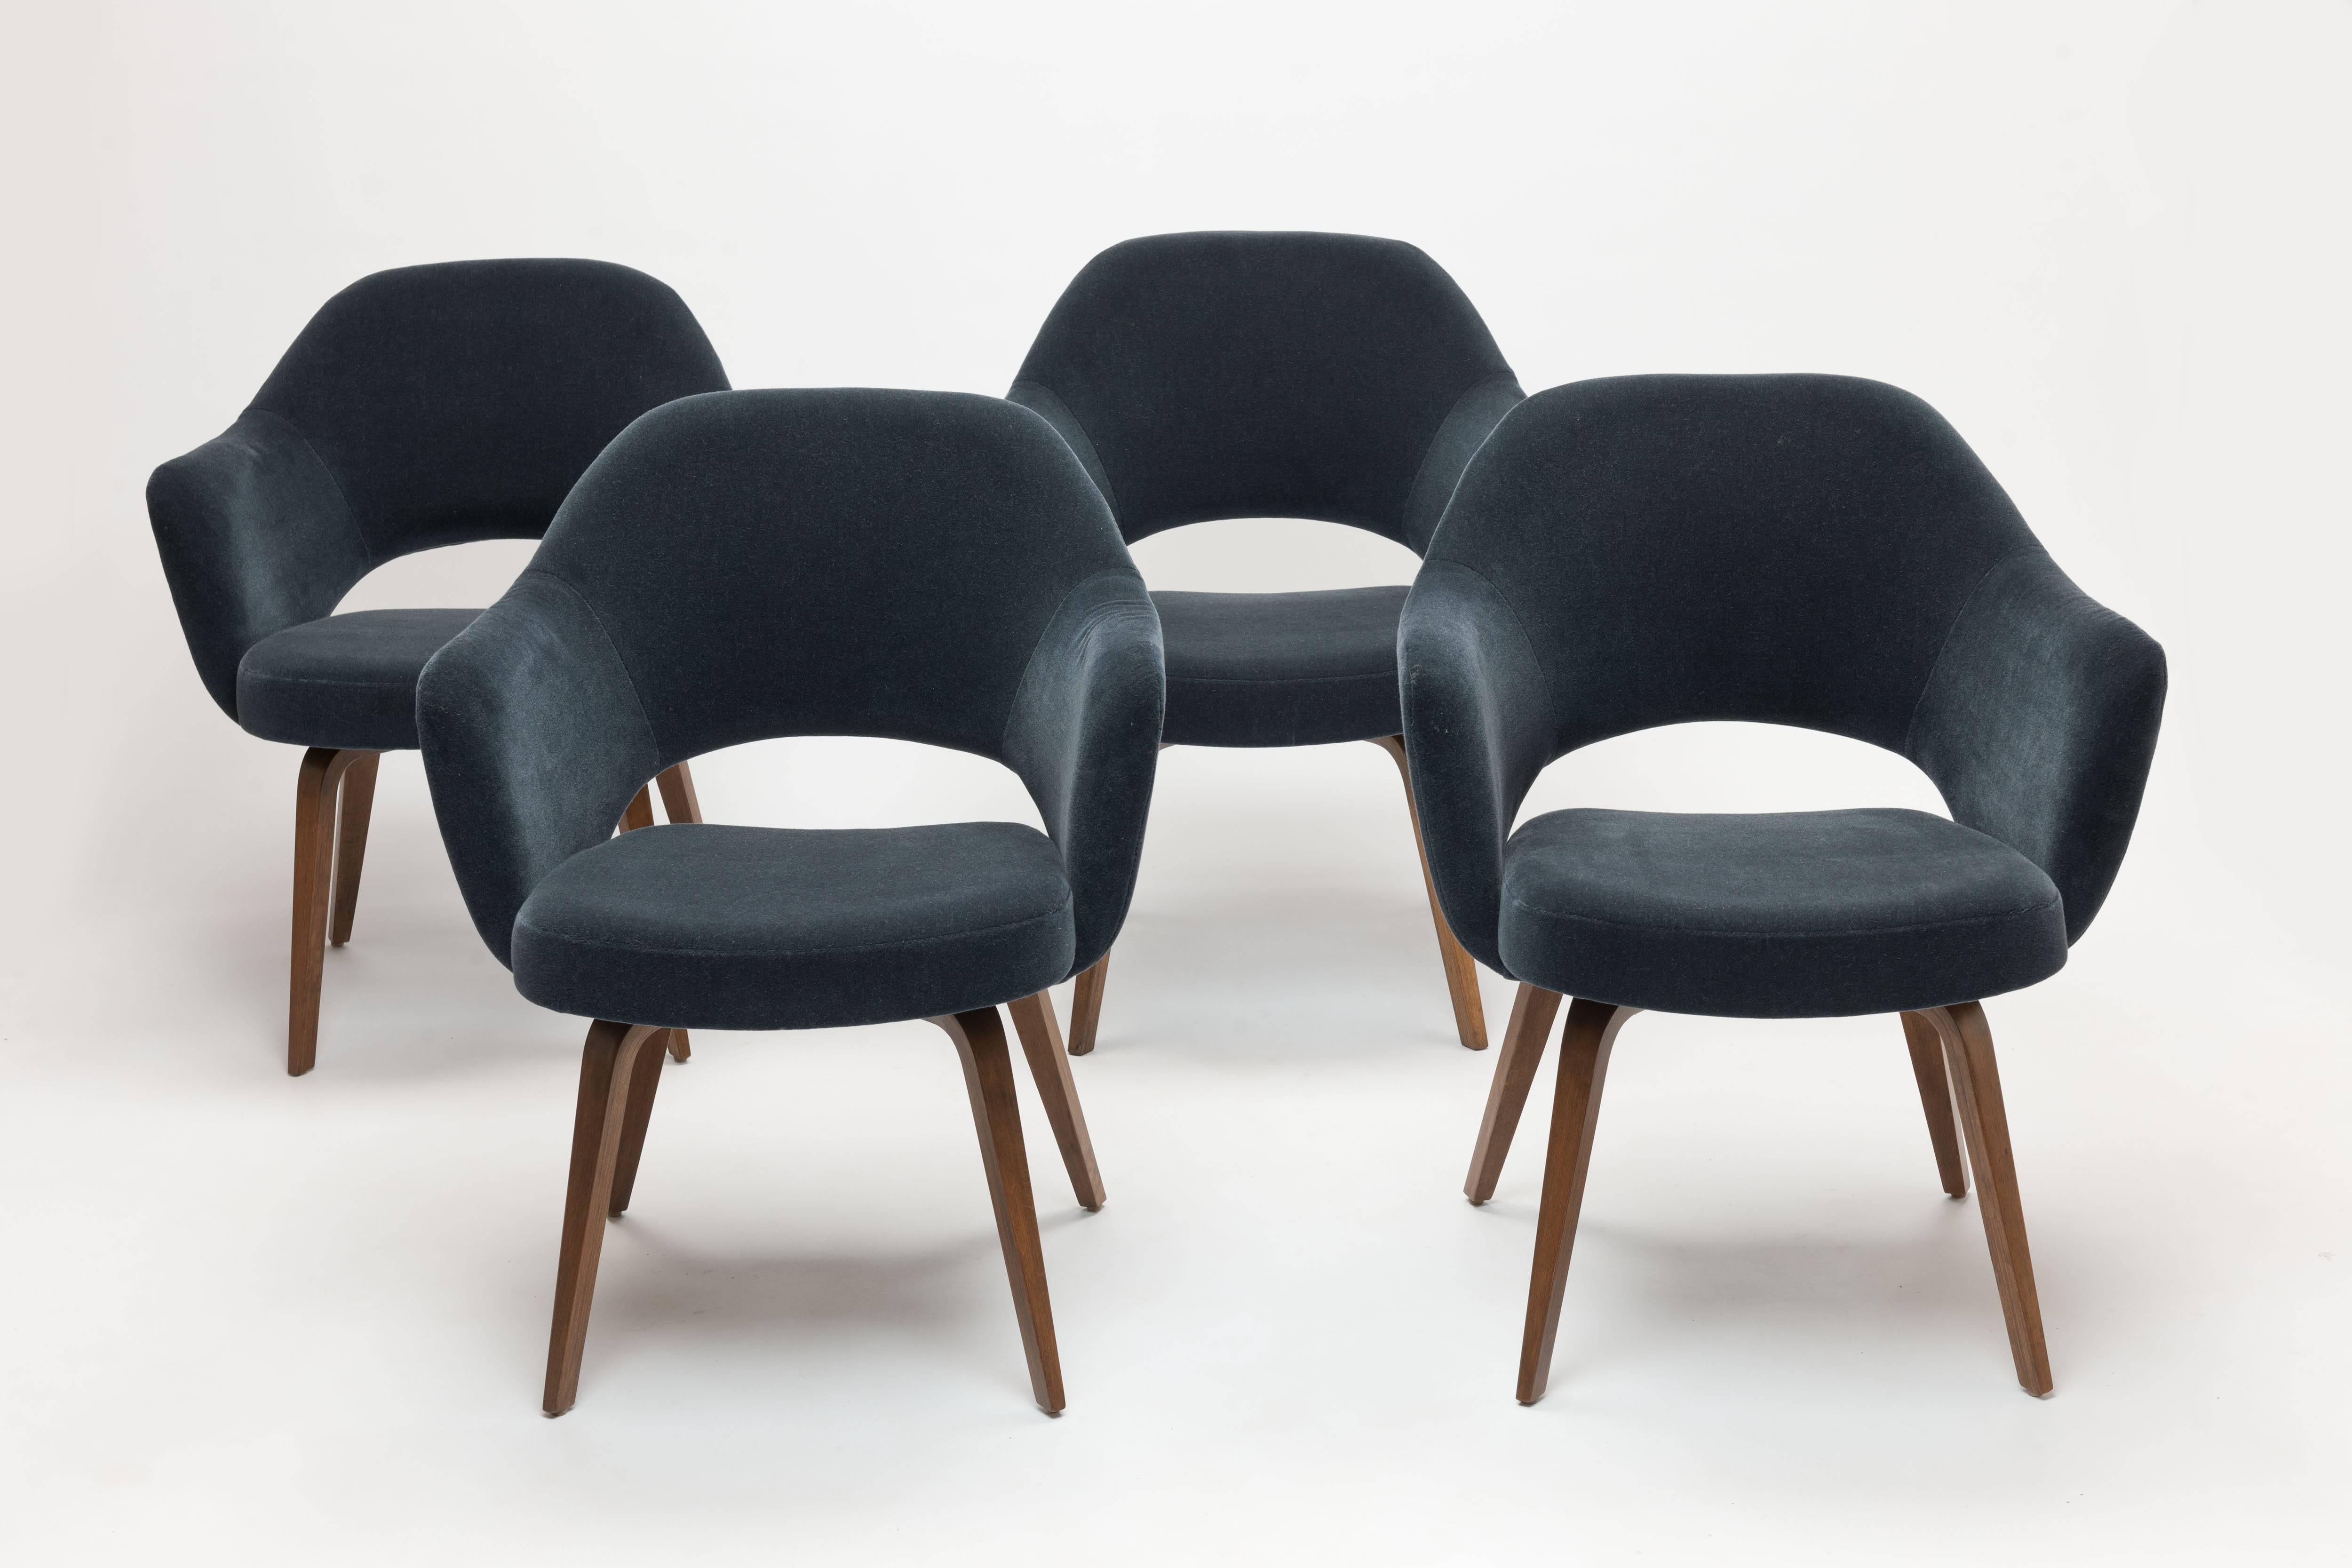 Four vintage Eero Saarinen for Knoll executive armchairs or dining chairs with Wooden Legs in most exclusive blue-grey velvet mohair upholstery. This is 'Knoll Velvet' fabric, the most expensive fabric option that Knoll offers. New price in this